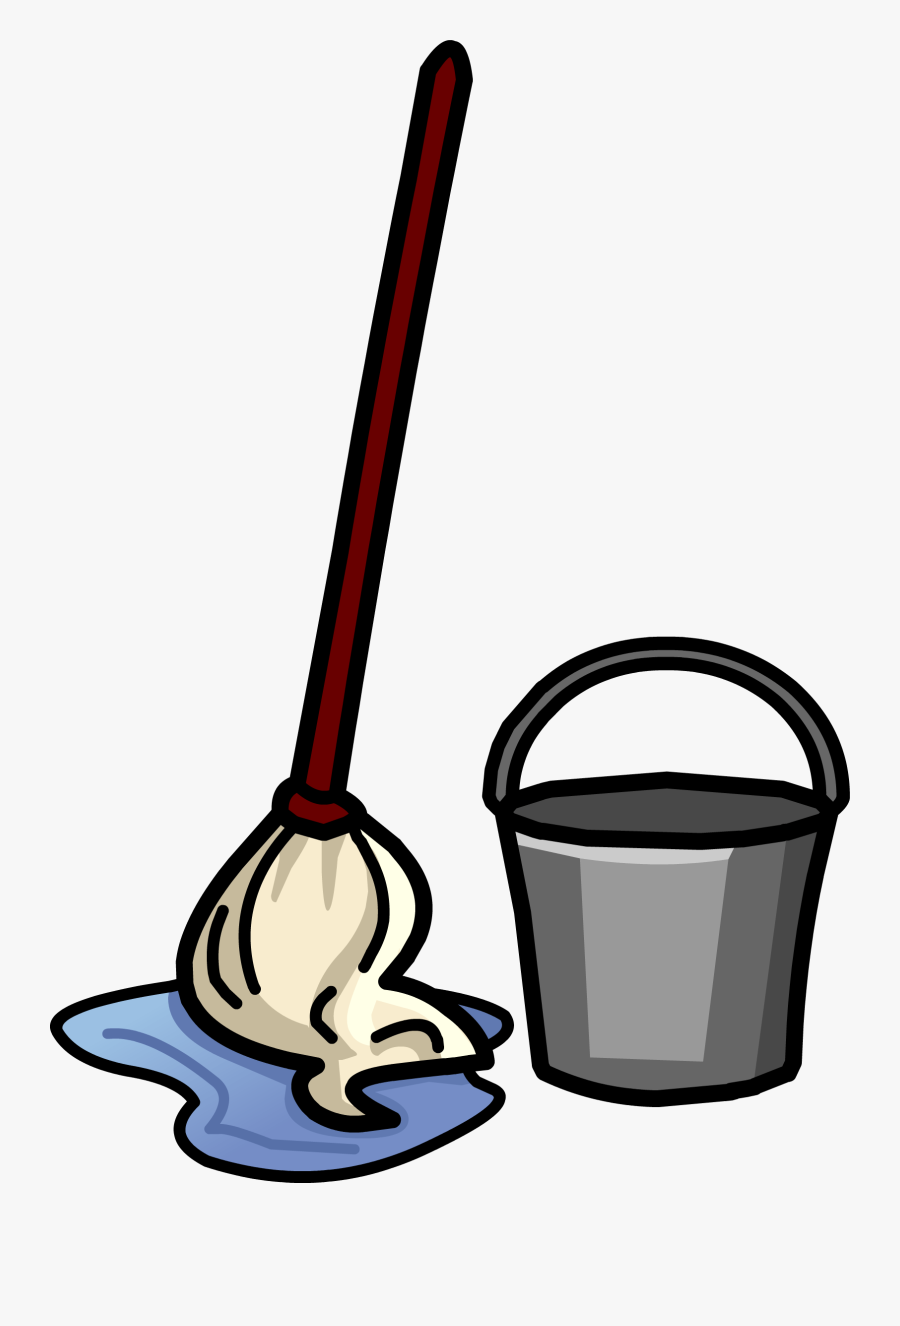 Thumb Image - Mop And Bucket Clipart, Transparent Clipart